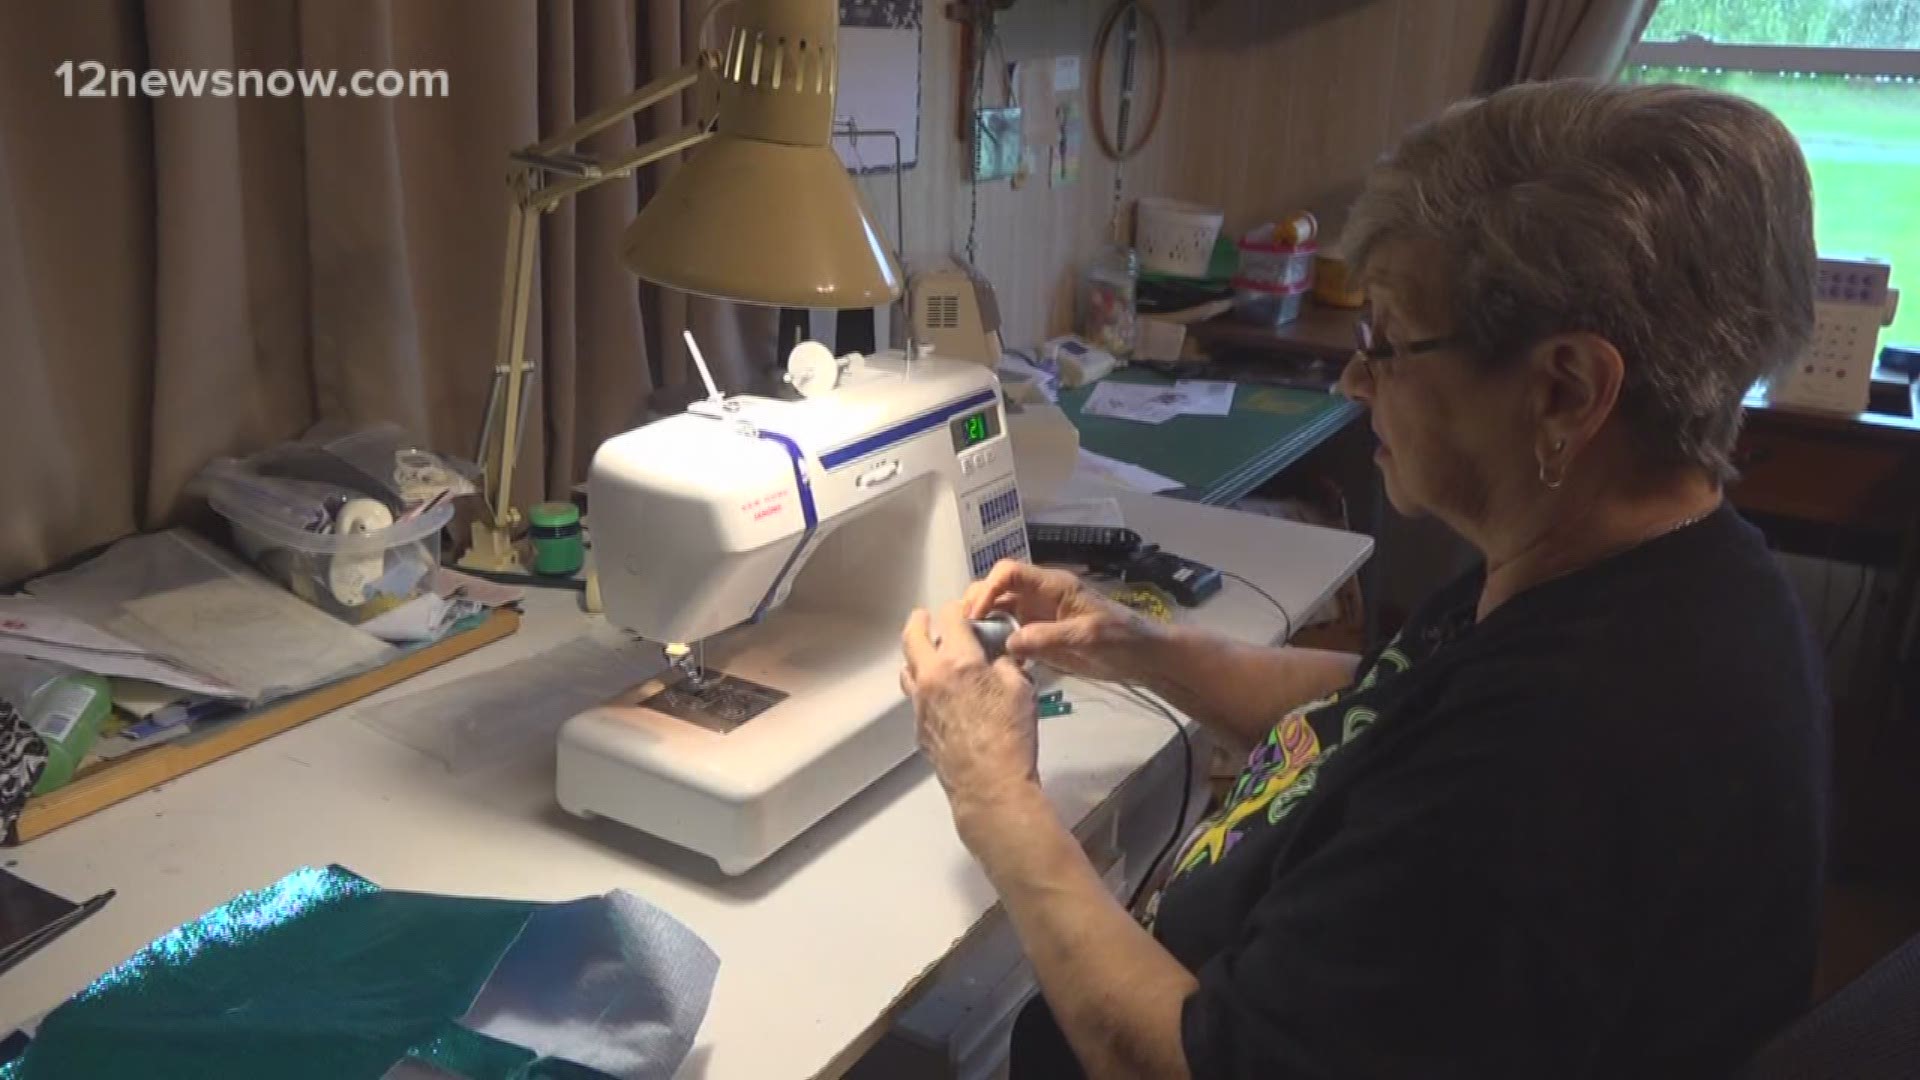 She's been sewing the intricate costumes for 18 years now.